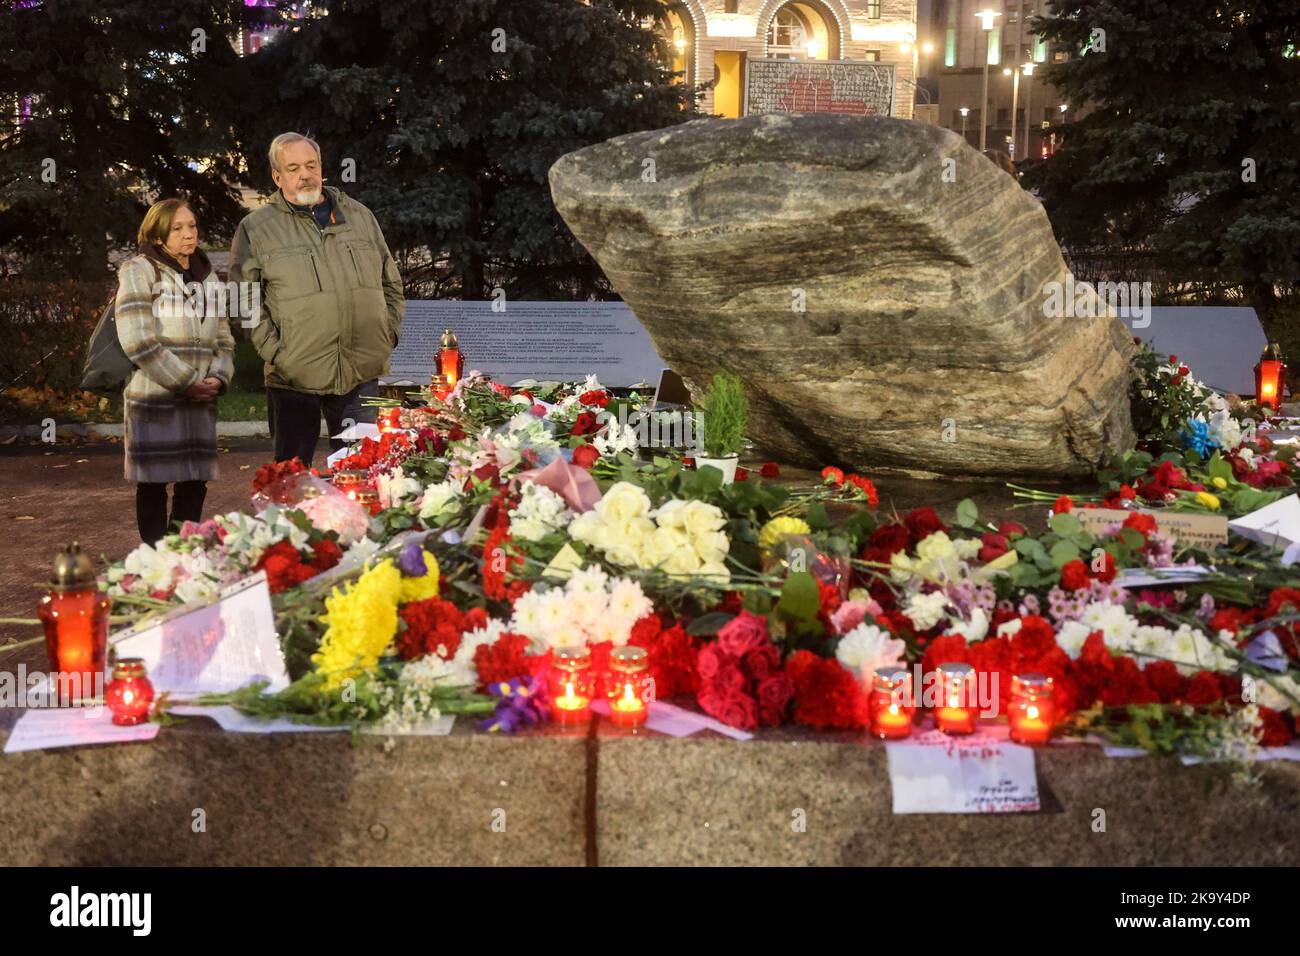 The monument for the victims of political terror in the Soviet Union in Lubyanka Square, Moscow. The stone from the Solovetsky Islands in the White Sea was placed here in 1990, opposite of the headquarters of the Soviet secret service KGB, now of its successor. People have brought flowers and candles in commemoration of the victims. In 2022, the usual ceremony of reading the victims' names was prohibited by the authorities. Stock Photo